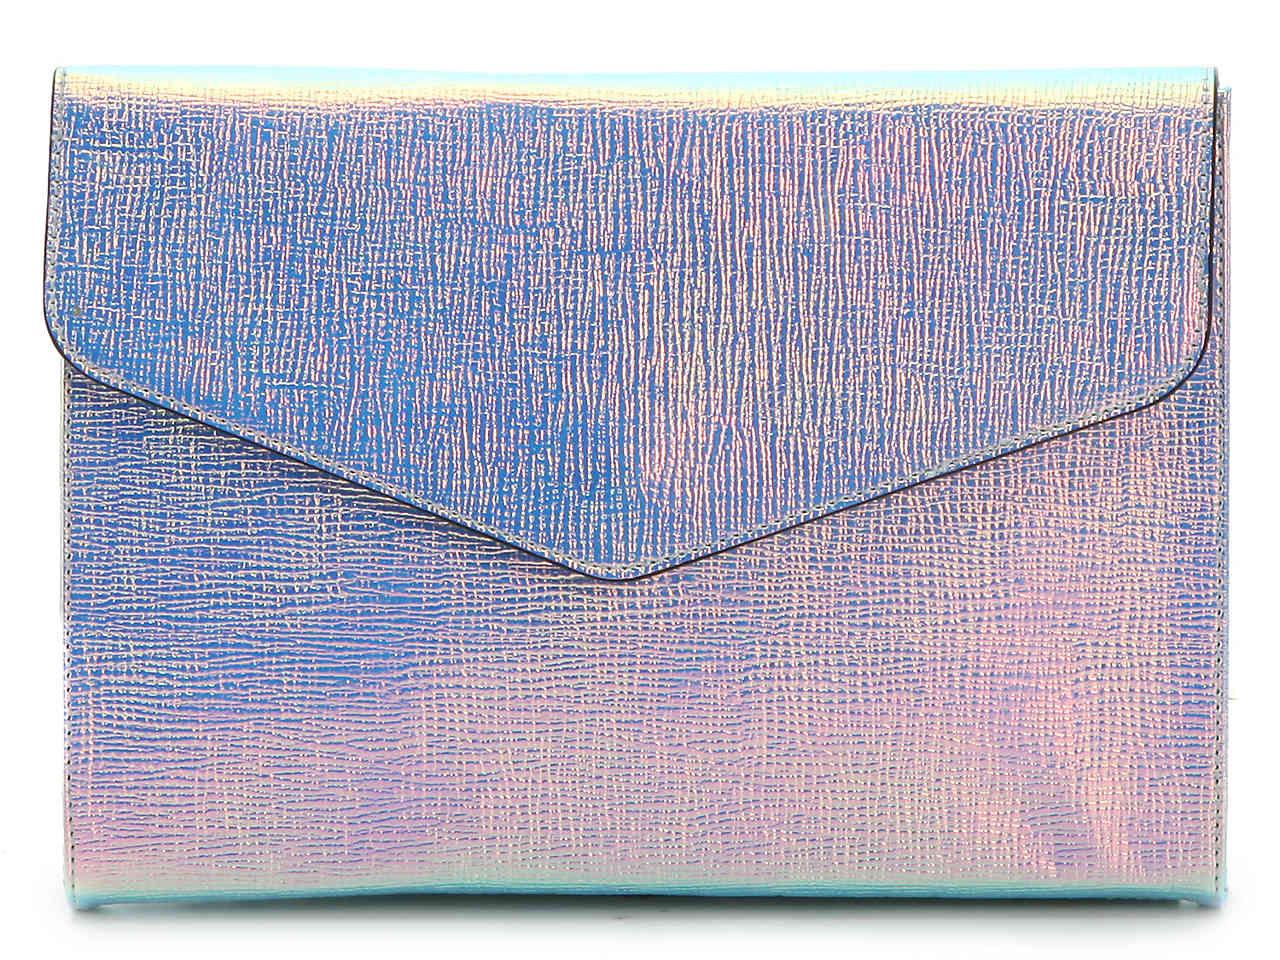 Holographic clutch